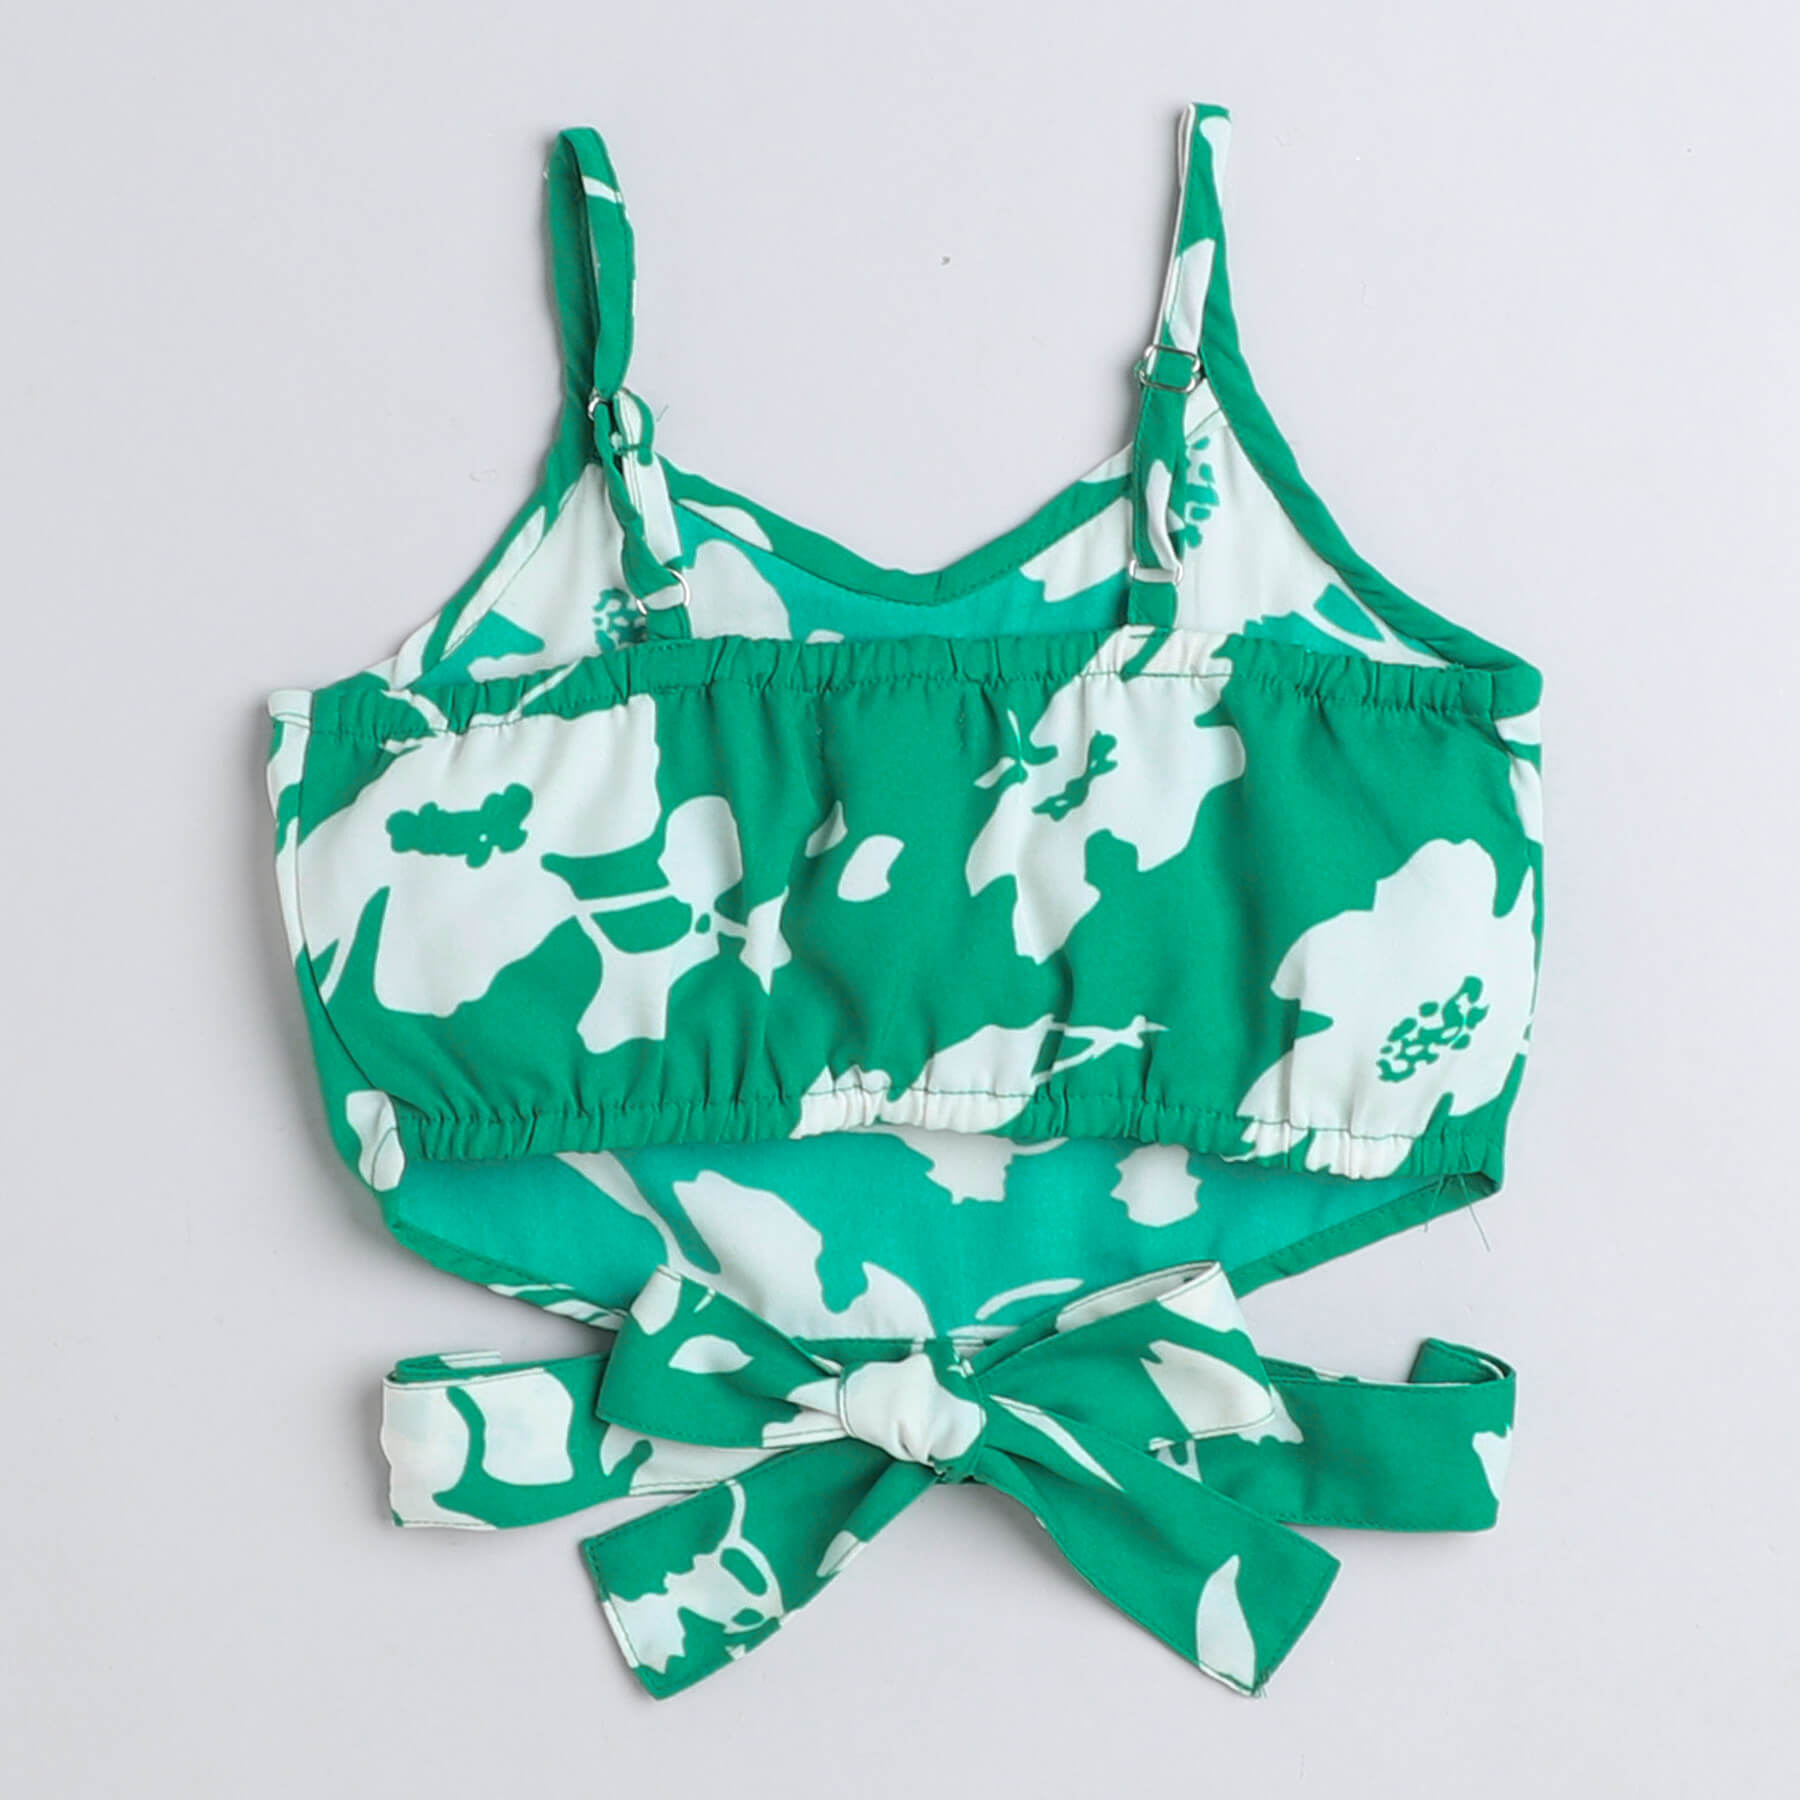 Taffykids floral printed singlet crop top with matching pant set - Green/ white